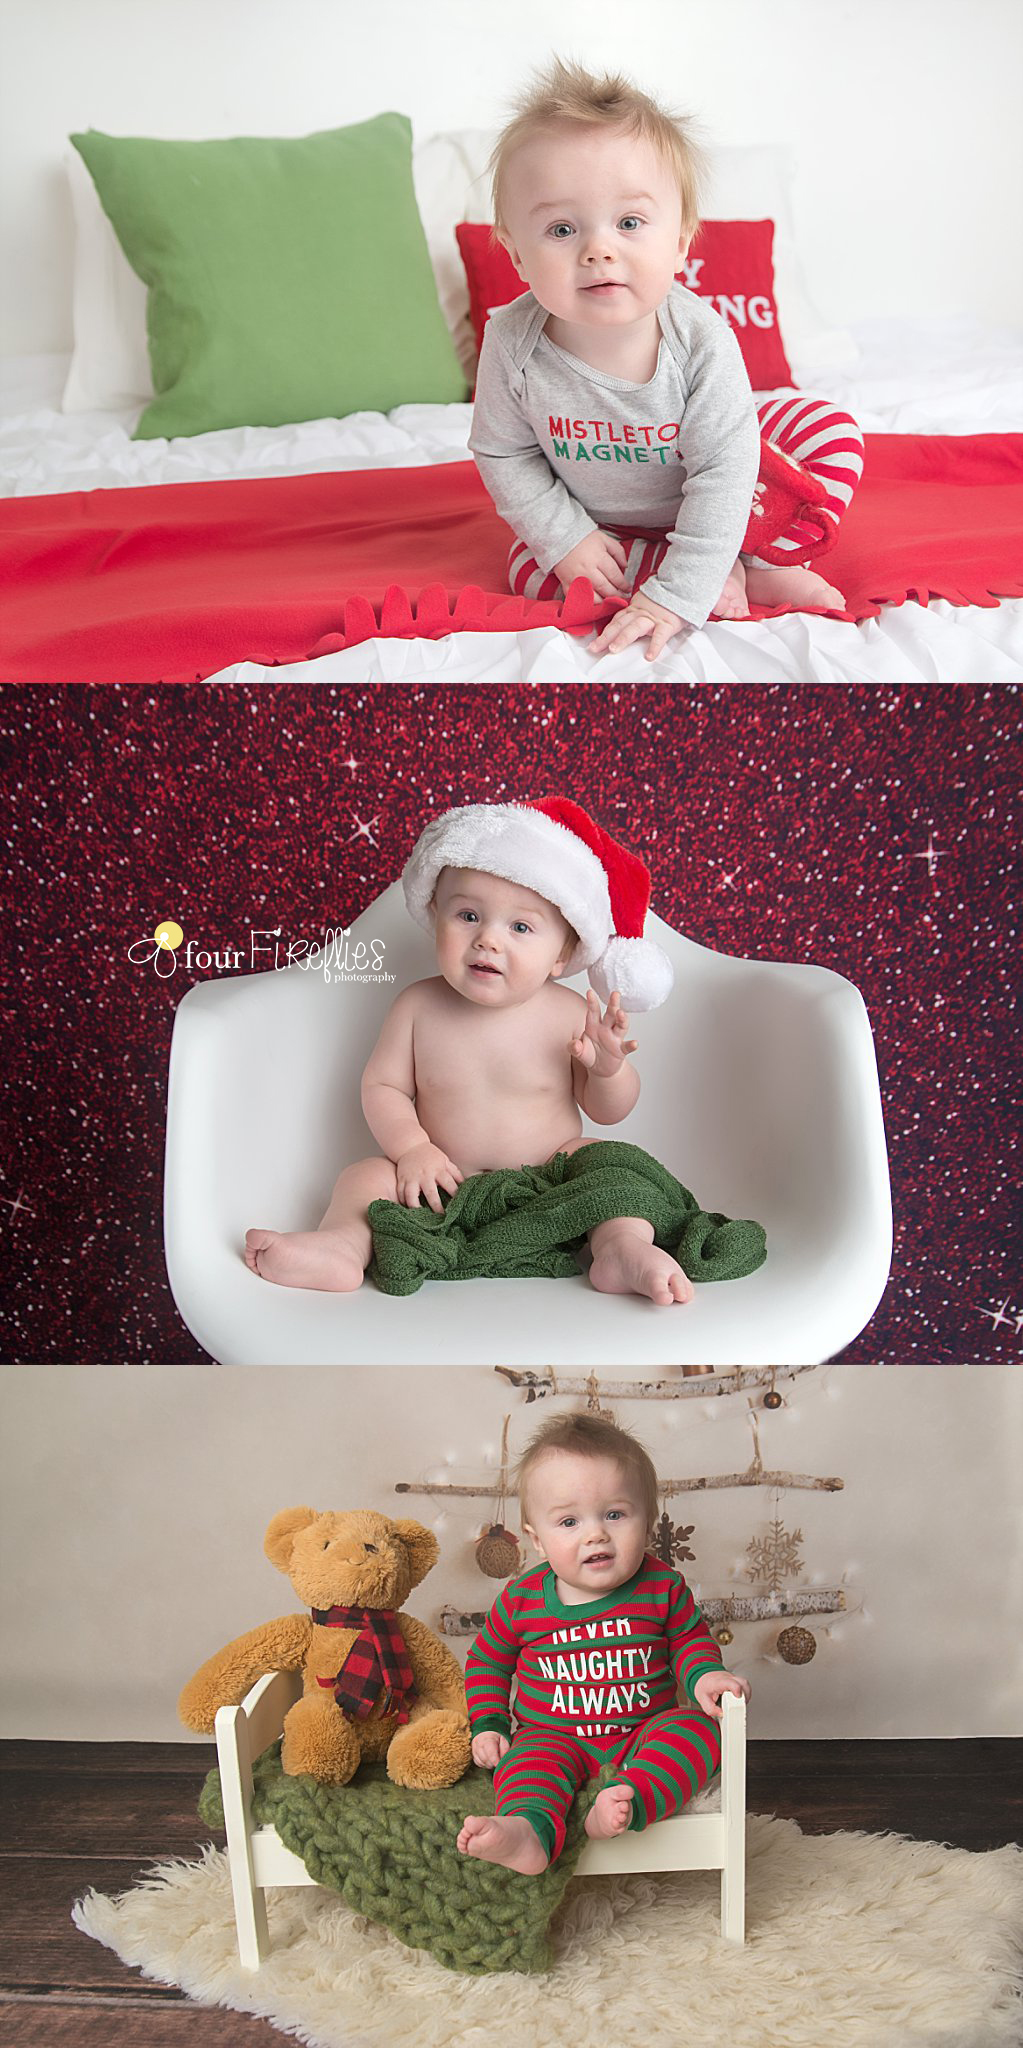 st-louis-baby-photographer-christmas-baby-on-three-different-backdrops-red-and-green-bed-red-sparkle-backdrop-rustic-tree-and-teddy-bear.jpg